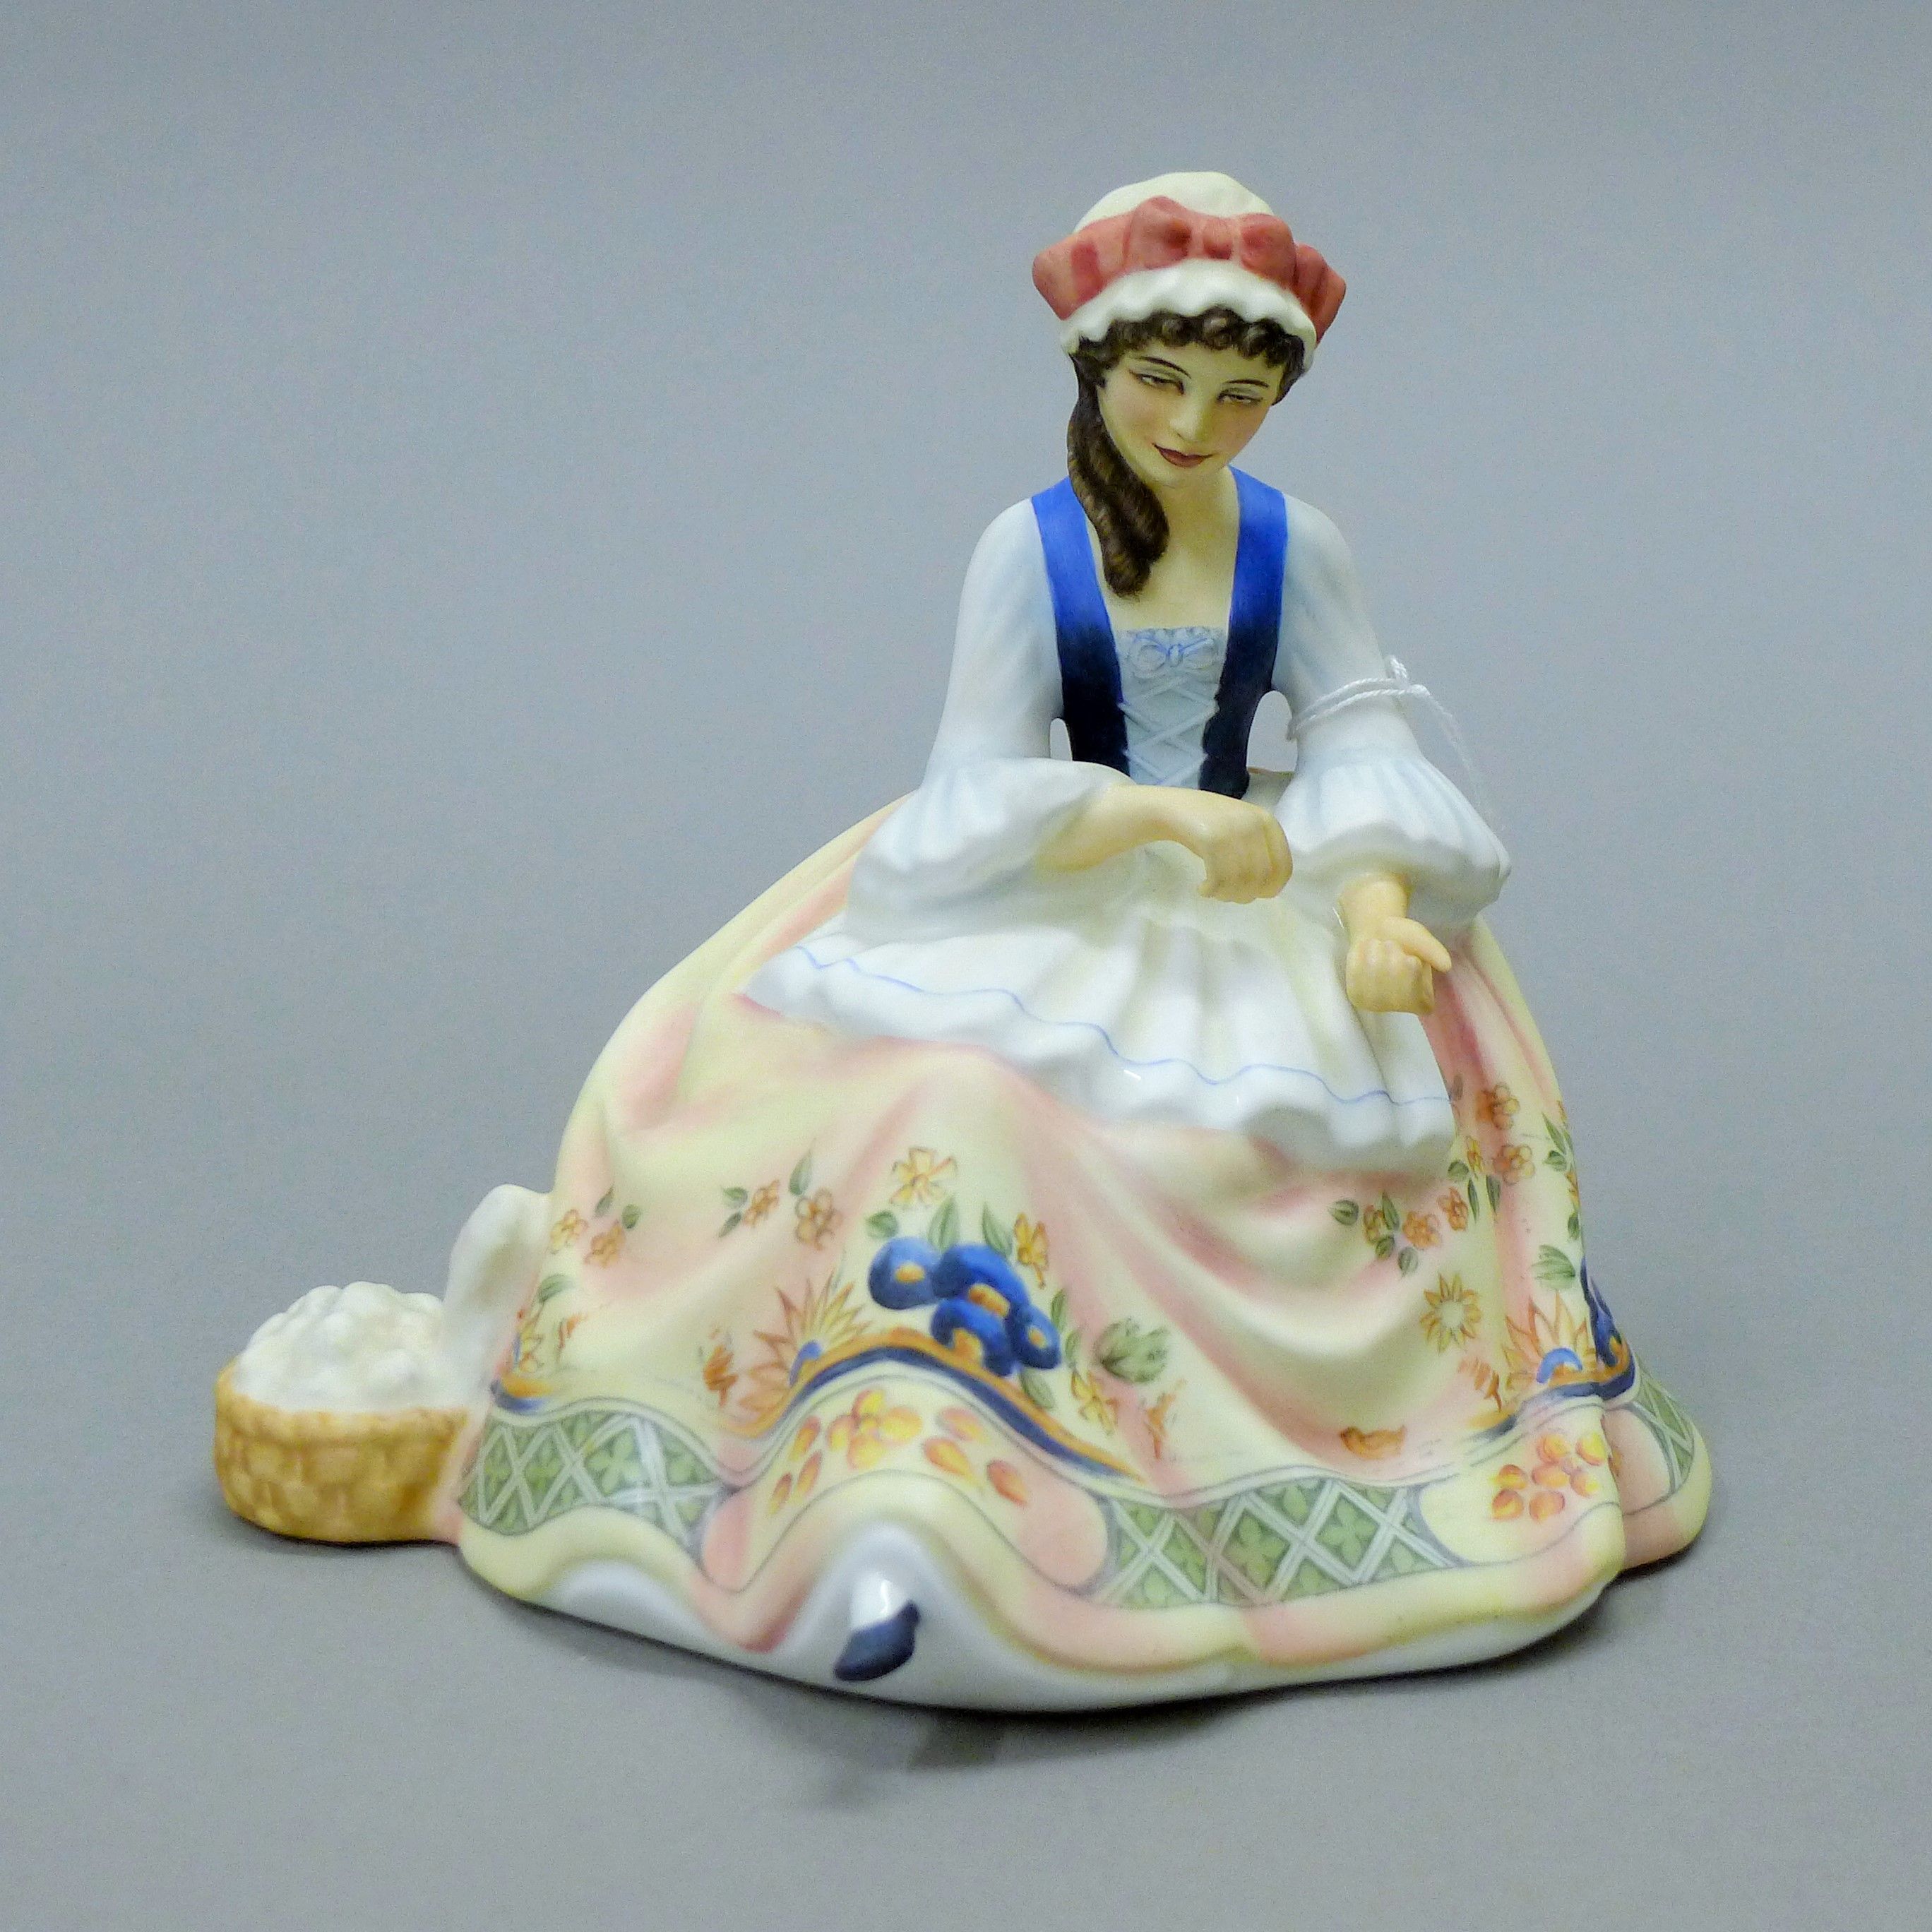 A Royal Doulton figurine, Spinning, HN2390. 17 cm high. - Image 2 of 5